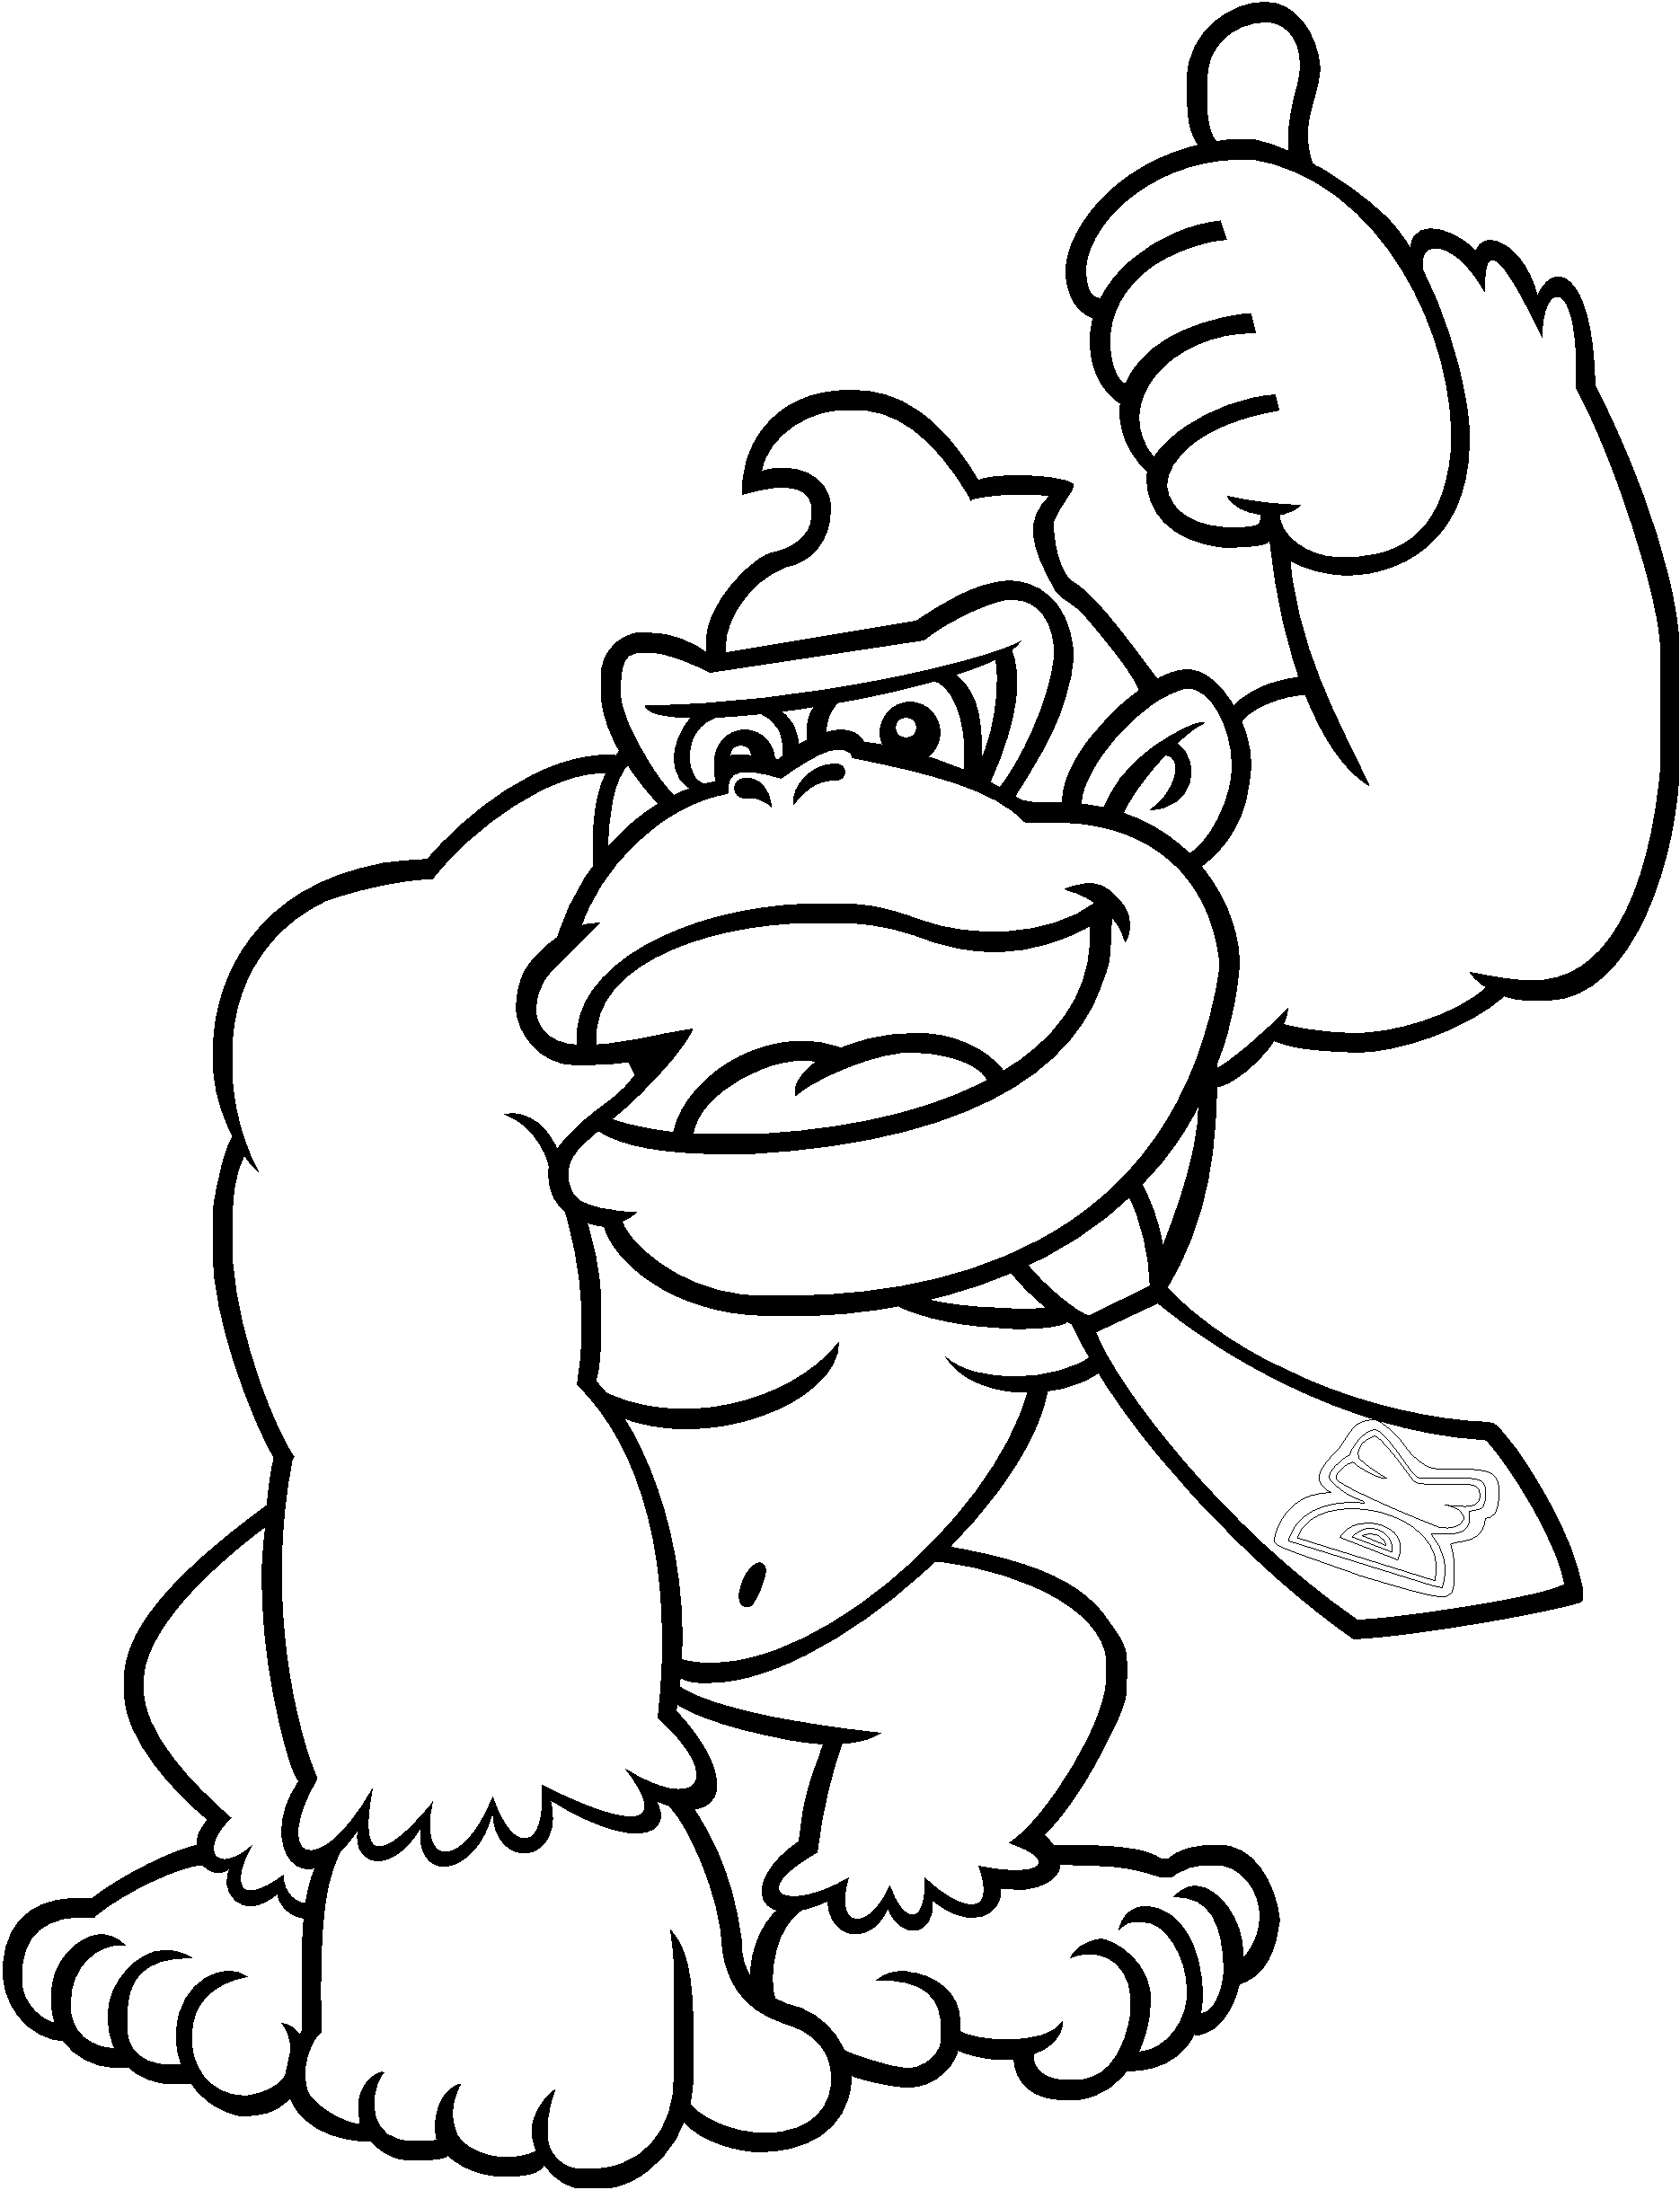 Donkey Kong Coloring Page   Coloring Home